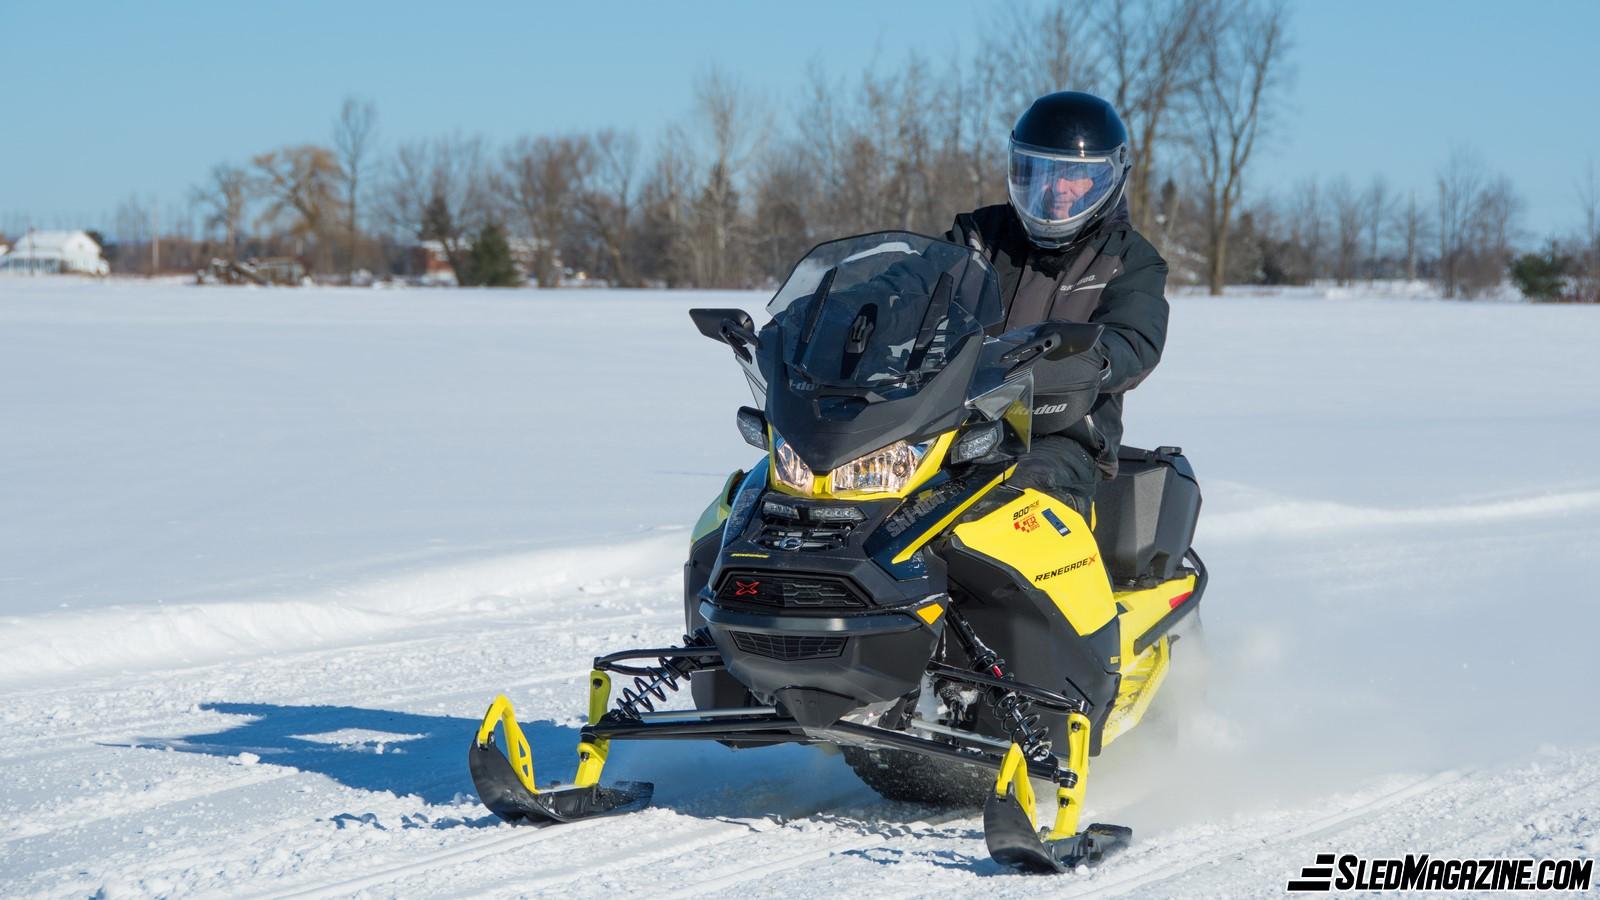 This season, thanks to the collaboration of BRP dealer Les Motoneiges Géro in St-Jean-de-Matha, I have the chance to test drive the 2021 Ski-Doo Renegade X 900 ACE Turbo. It’s a high-performance hybrid model that has been specifically designed to provide a superior driving experience, especially in terms of suspension. At the time of writing these lines and despite a late winter, I have covered enough kilometers to share with you my first impressions.